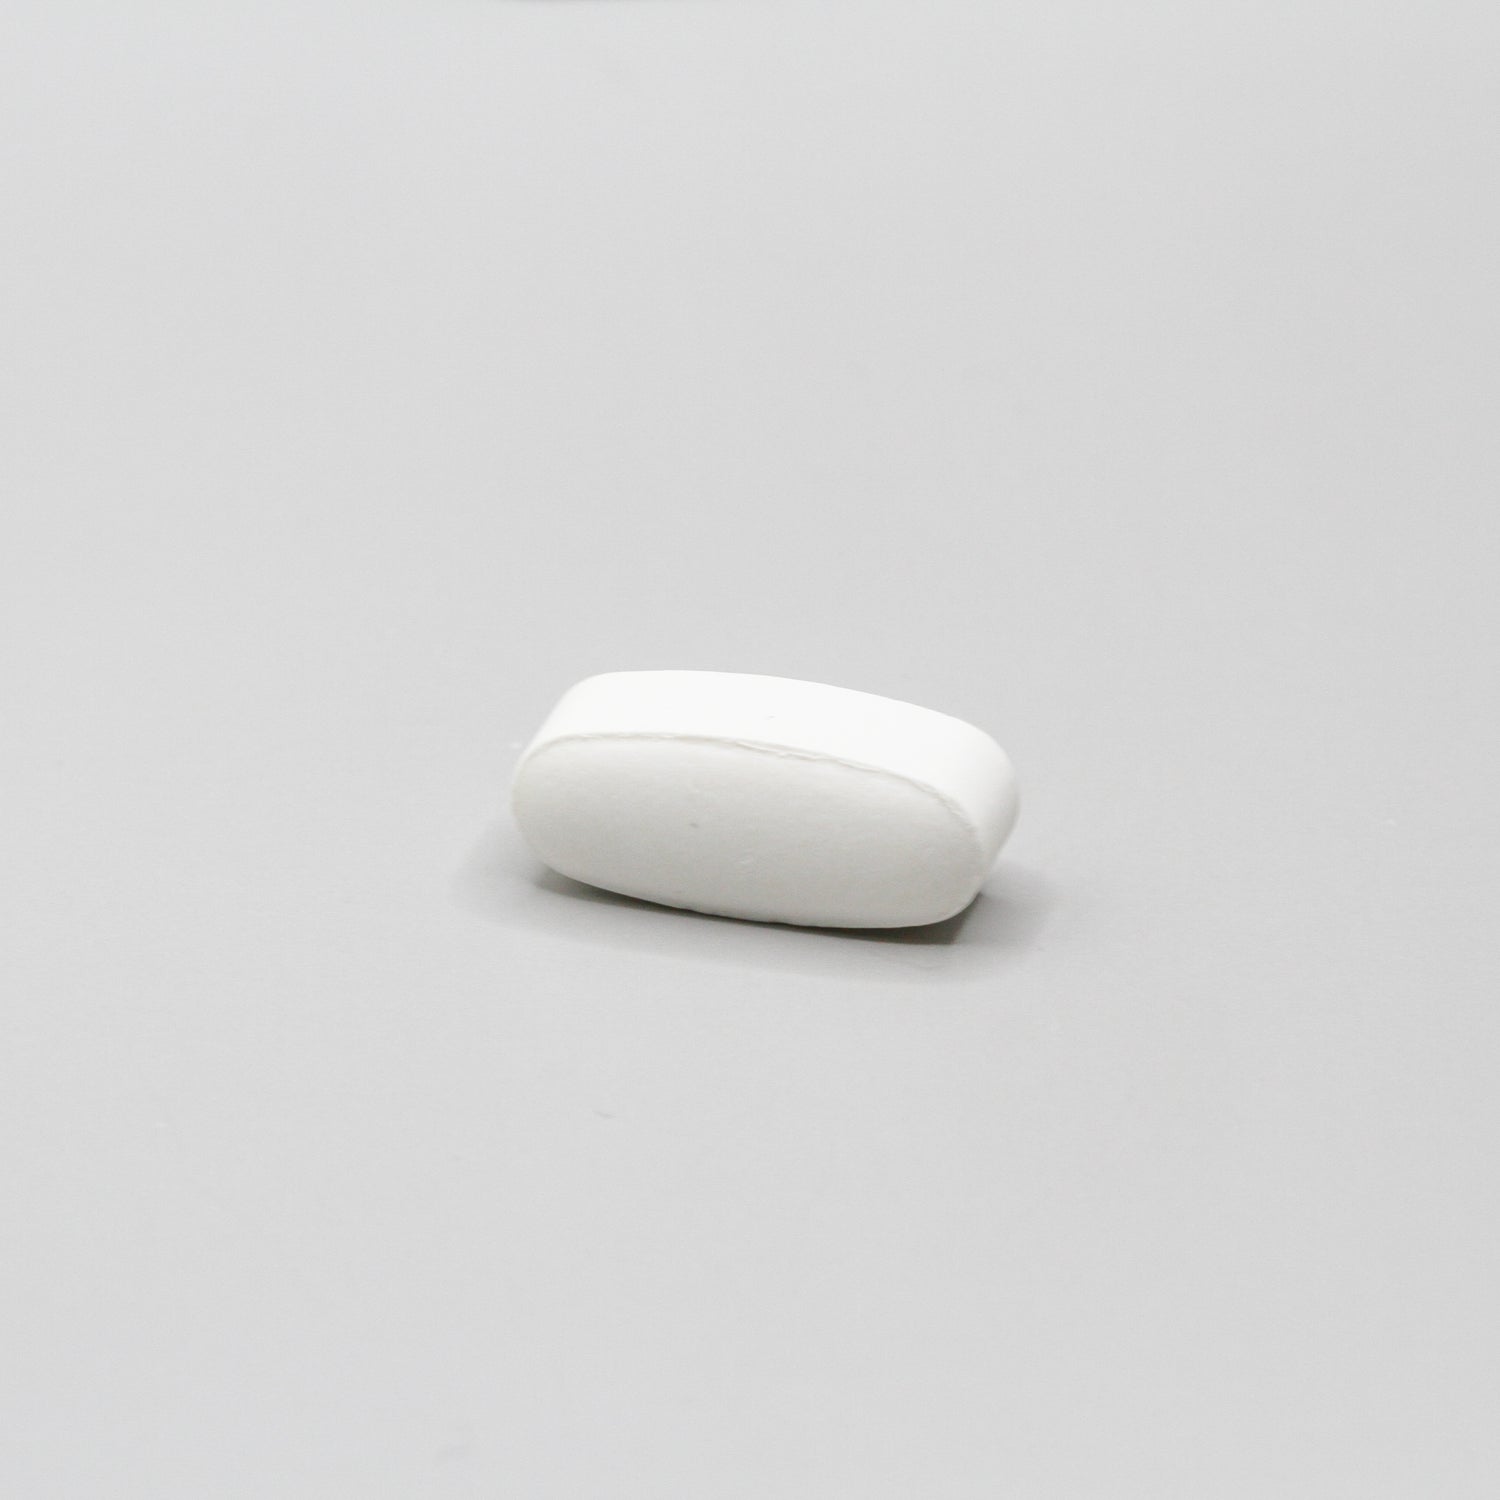 White oval pill